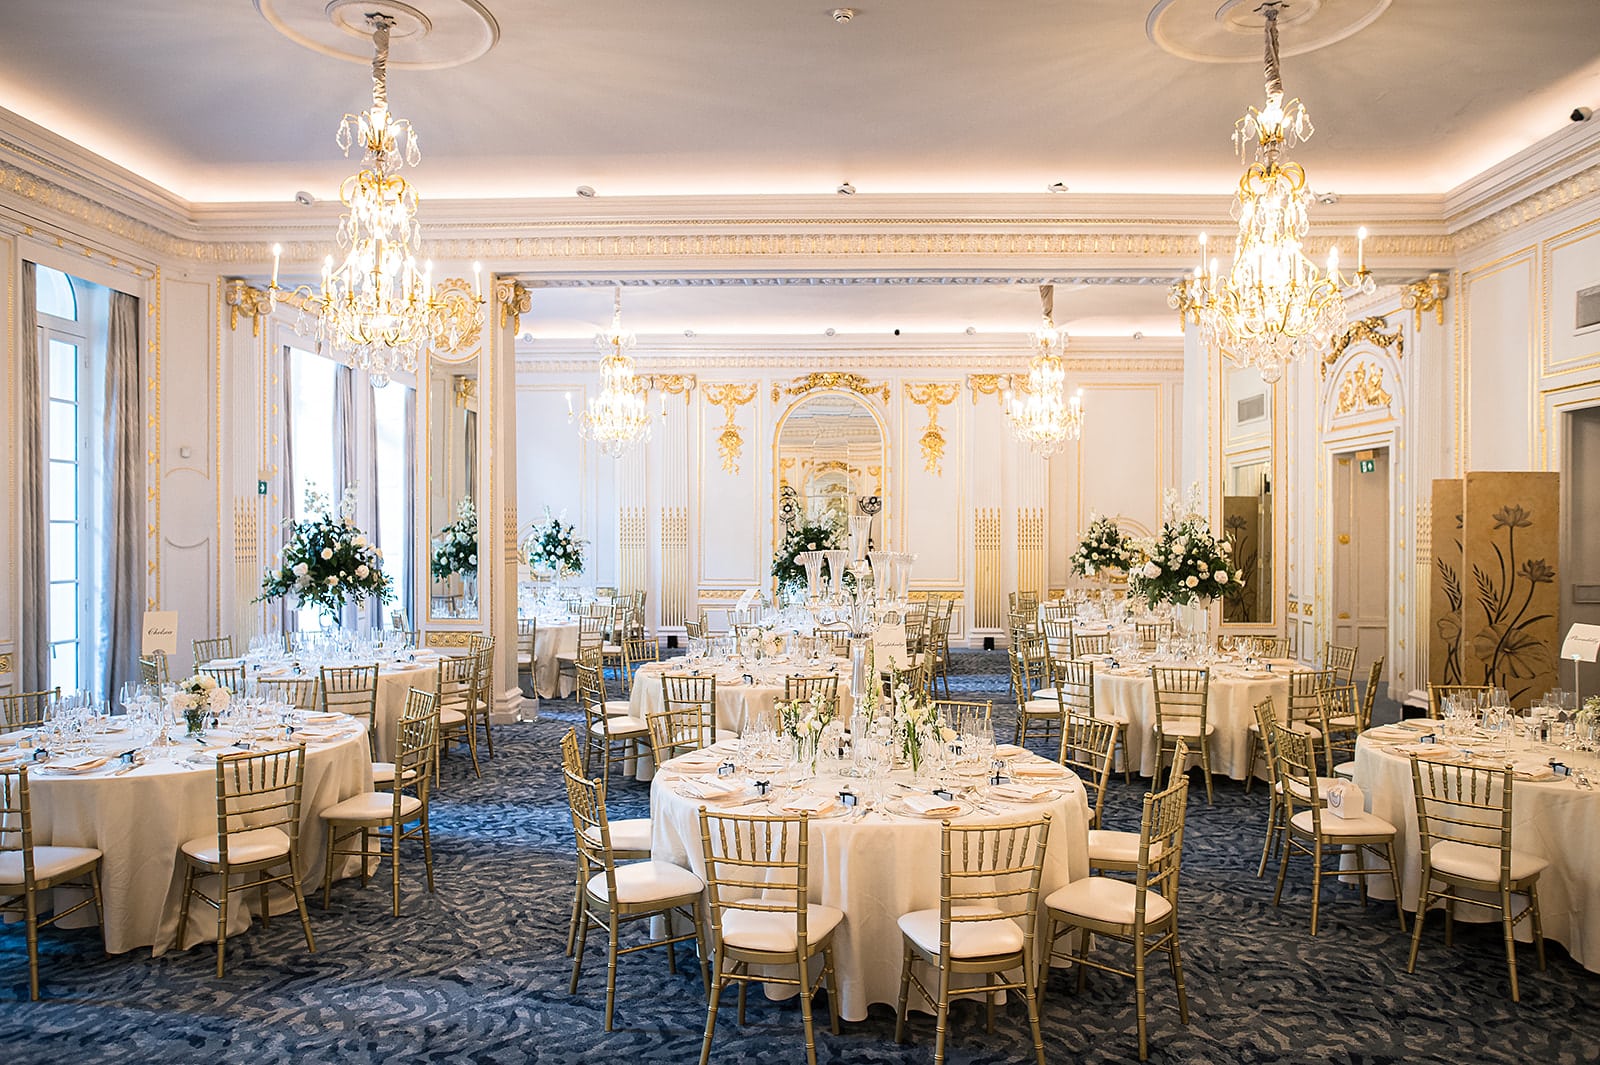 Green and White theme wedding breakfast setting at the Mandarin Oriental Hotel Hyde Park